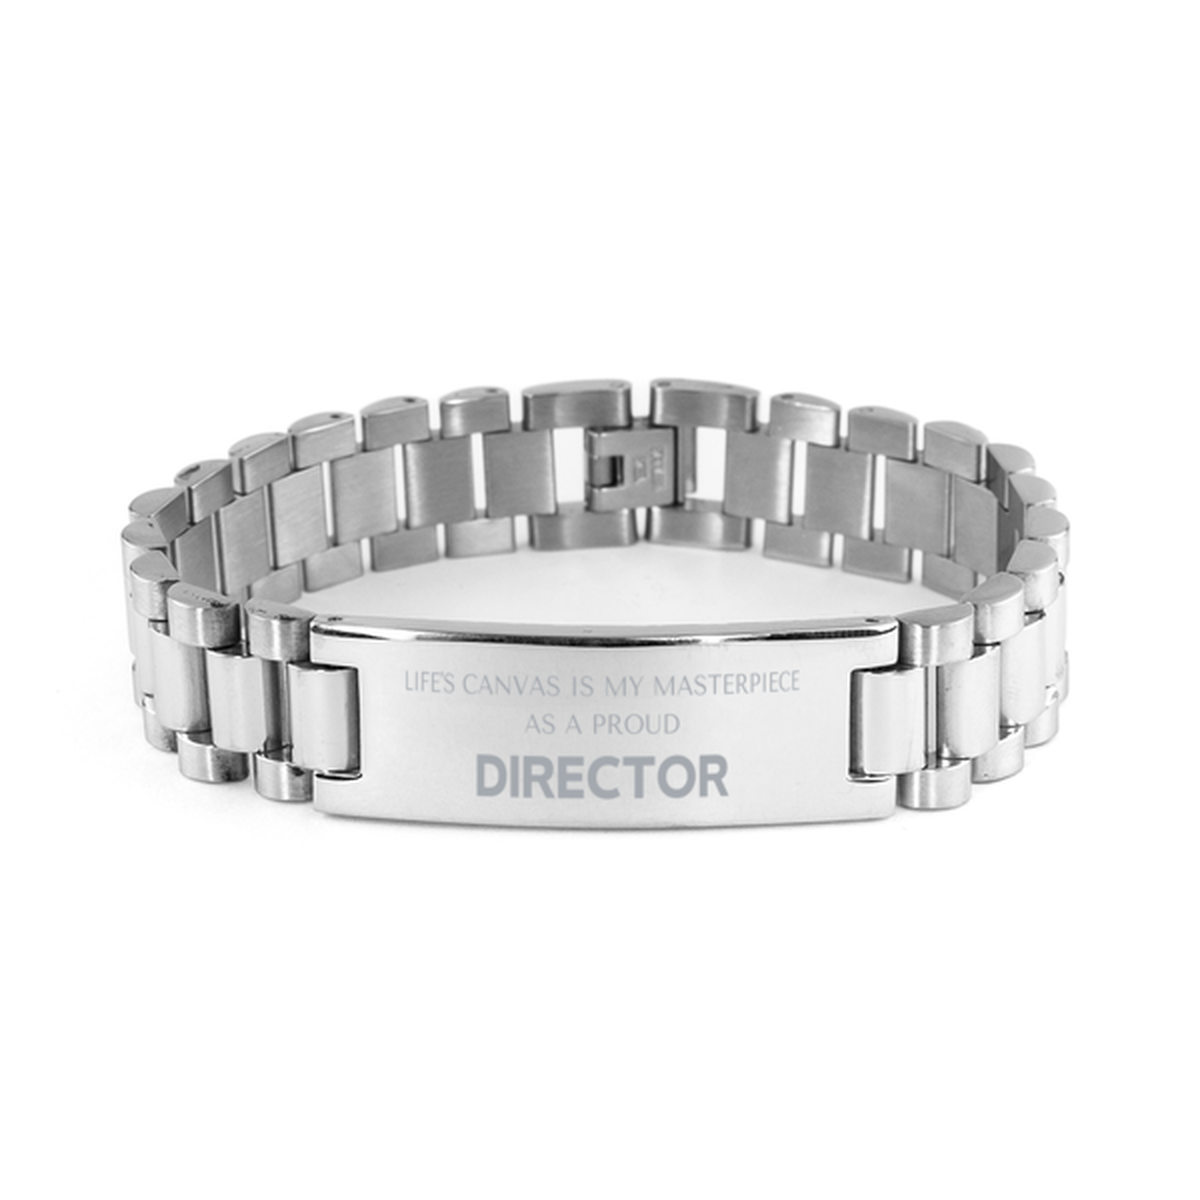 Proud Director Gifts, Life's canvas is my masterpiece, Epic Birthday Christmas Unique Ladder Stainless Steel Bracelet For Director, Coworkers, Men, Women, Friends